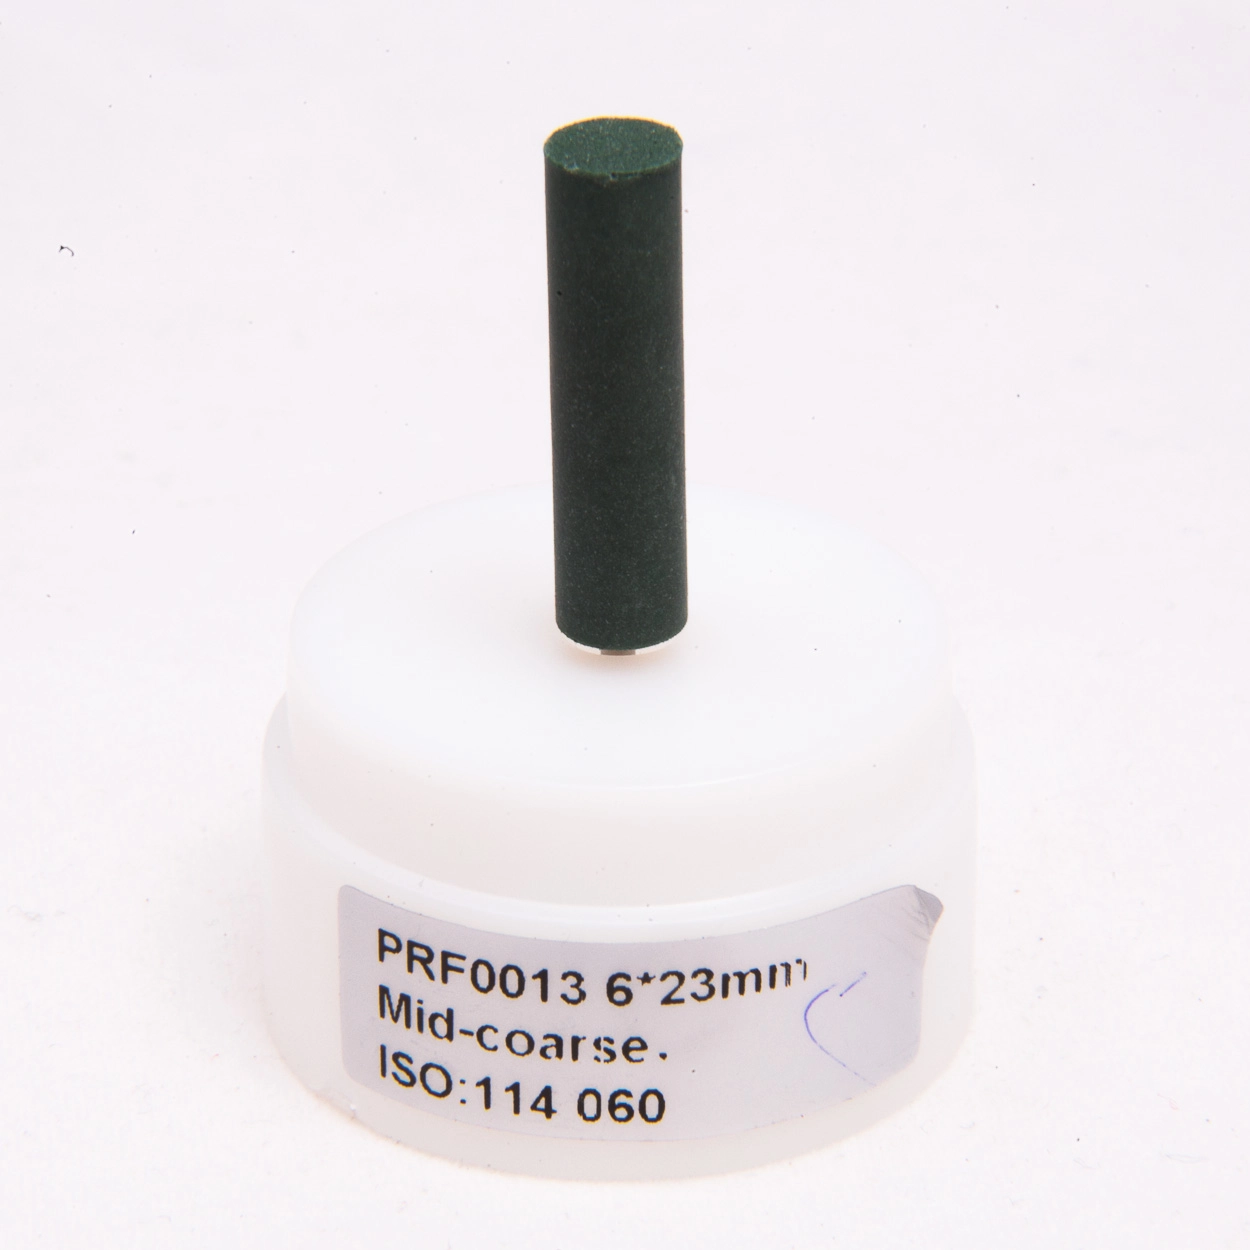 Rubber Polisher, green, 10 pcs, long cylindre shaped, medium hard, 6x23mm, without mandrel, ISO: 114 524, 20-30 000 rpm